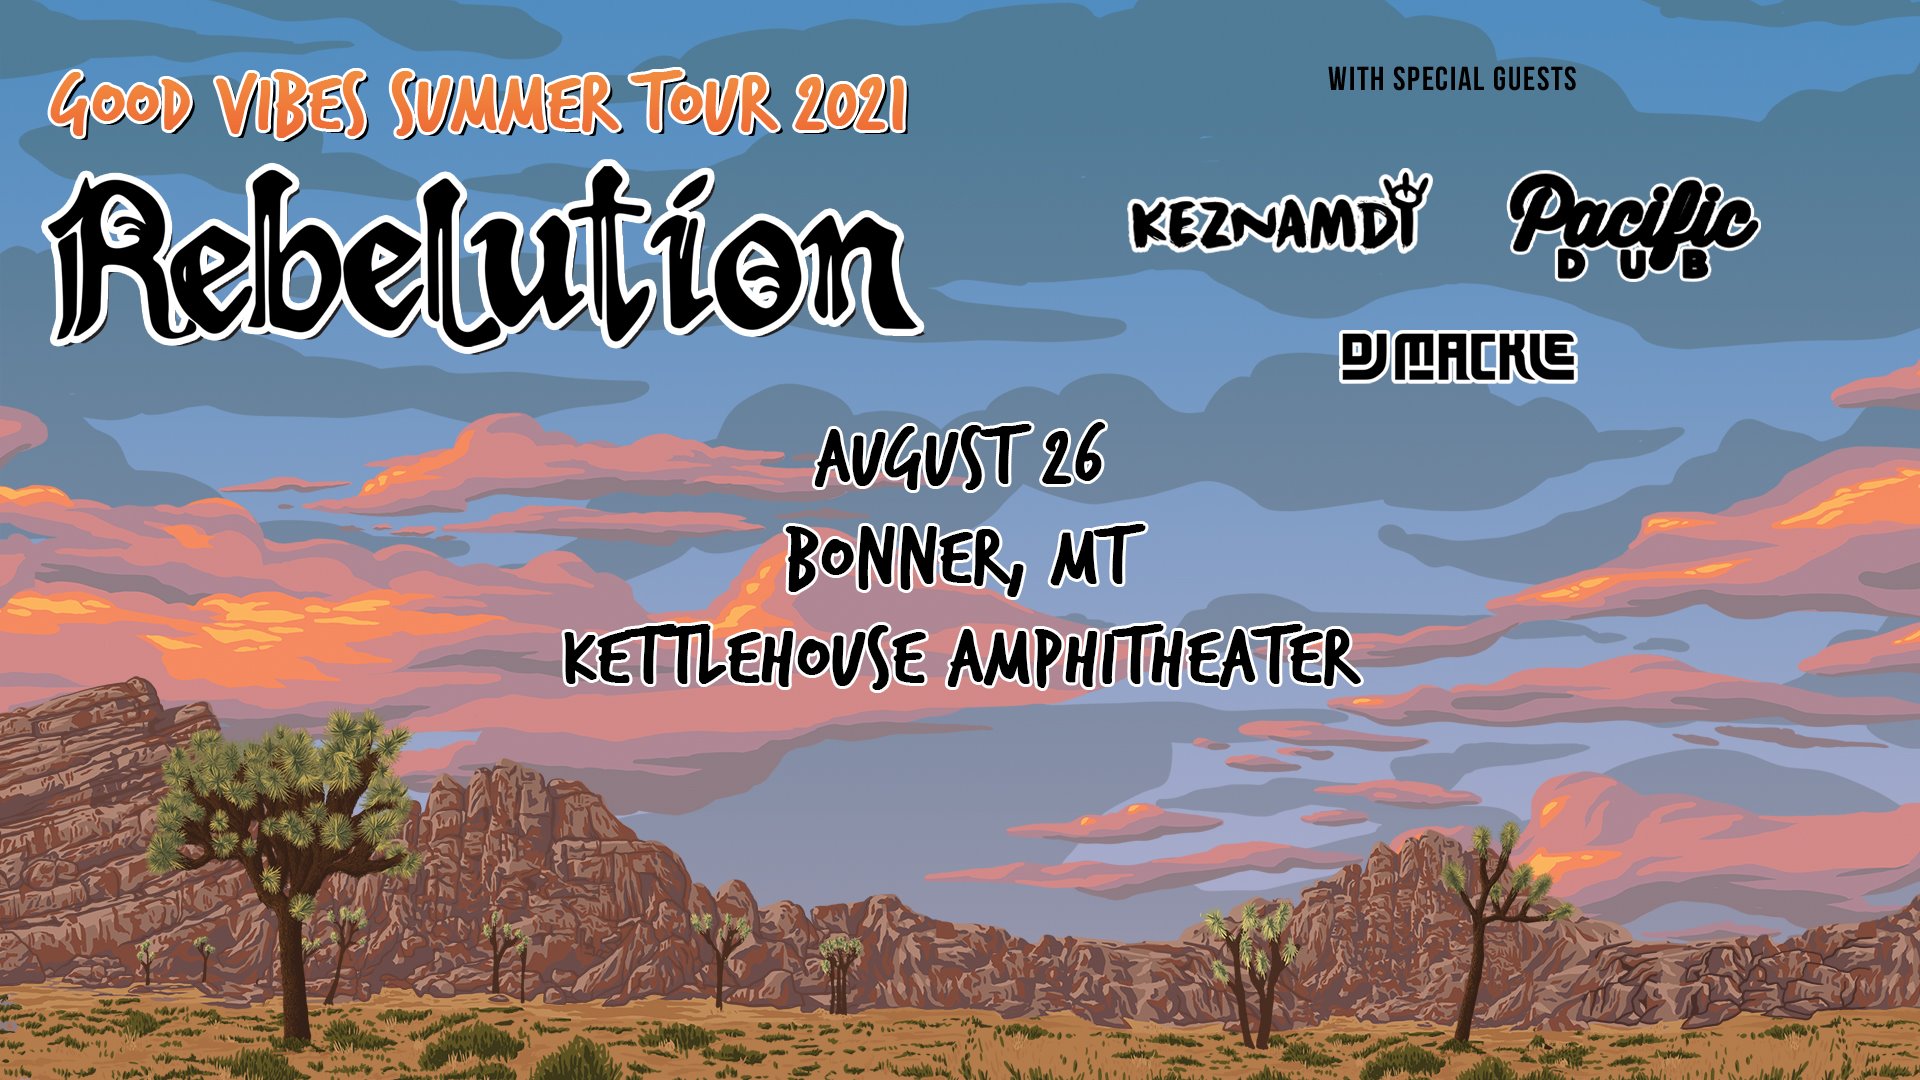 Good Vibes Summer Tour 2021: Rebelution + Special Guests